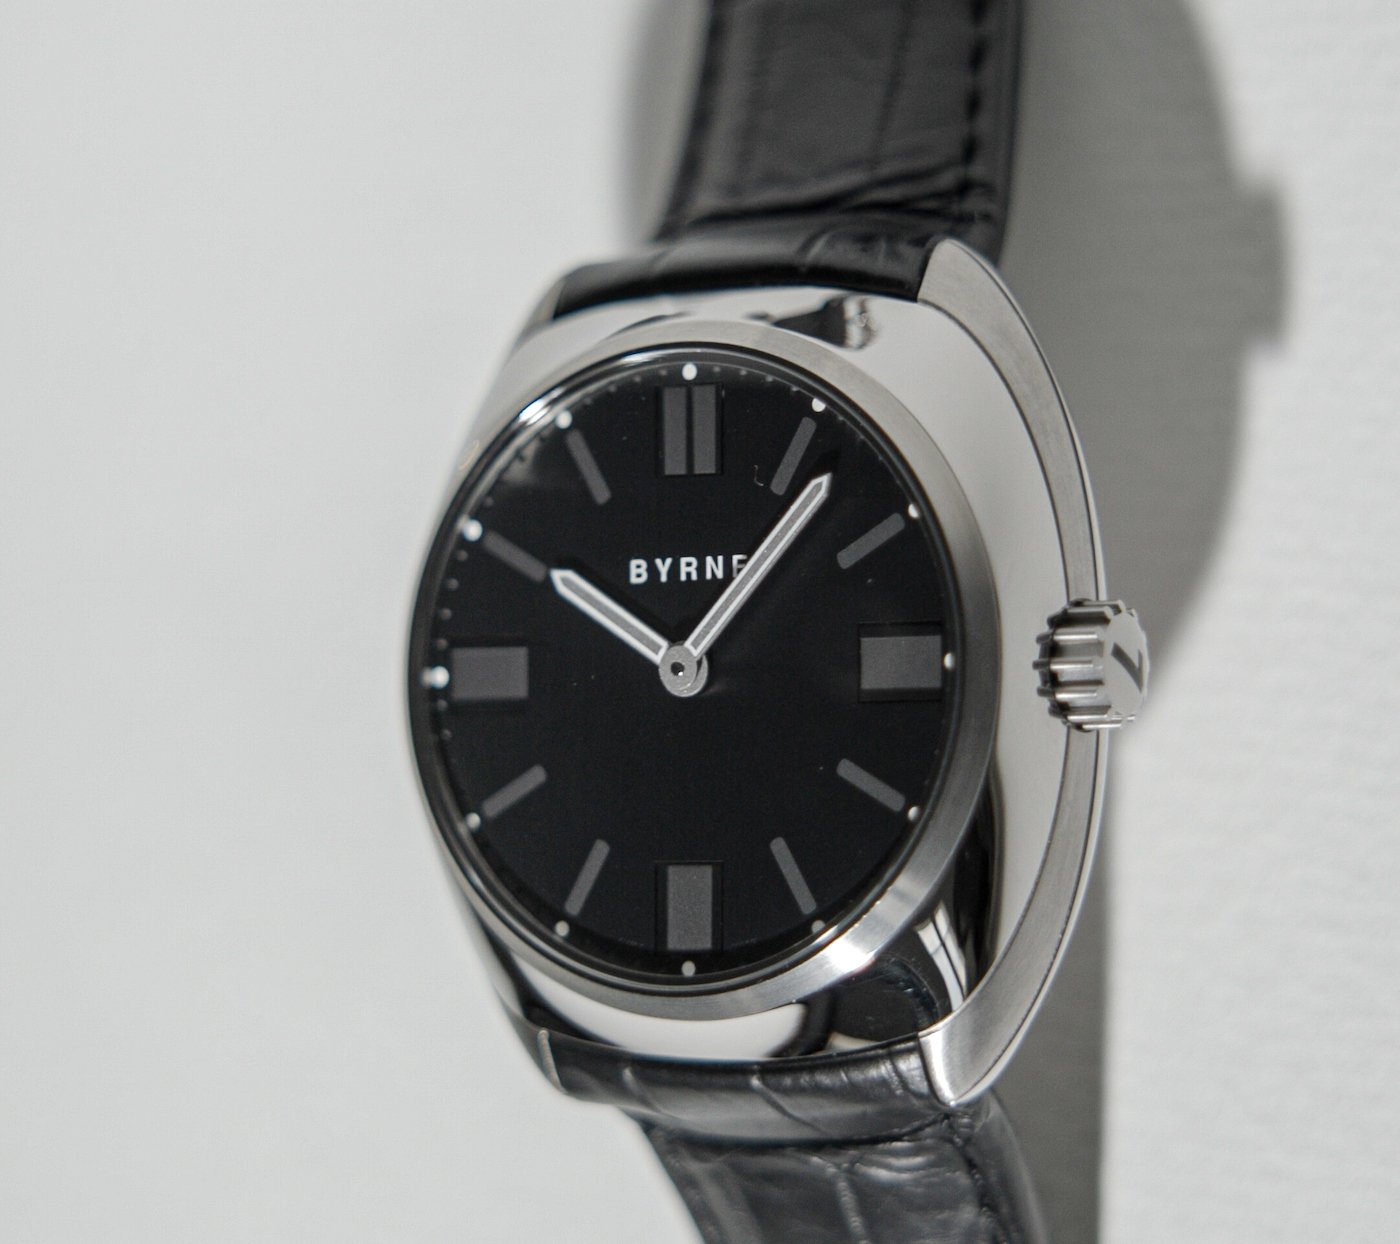 Byrne Watches presents the GyroDial in a sport version